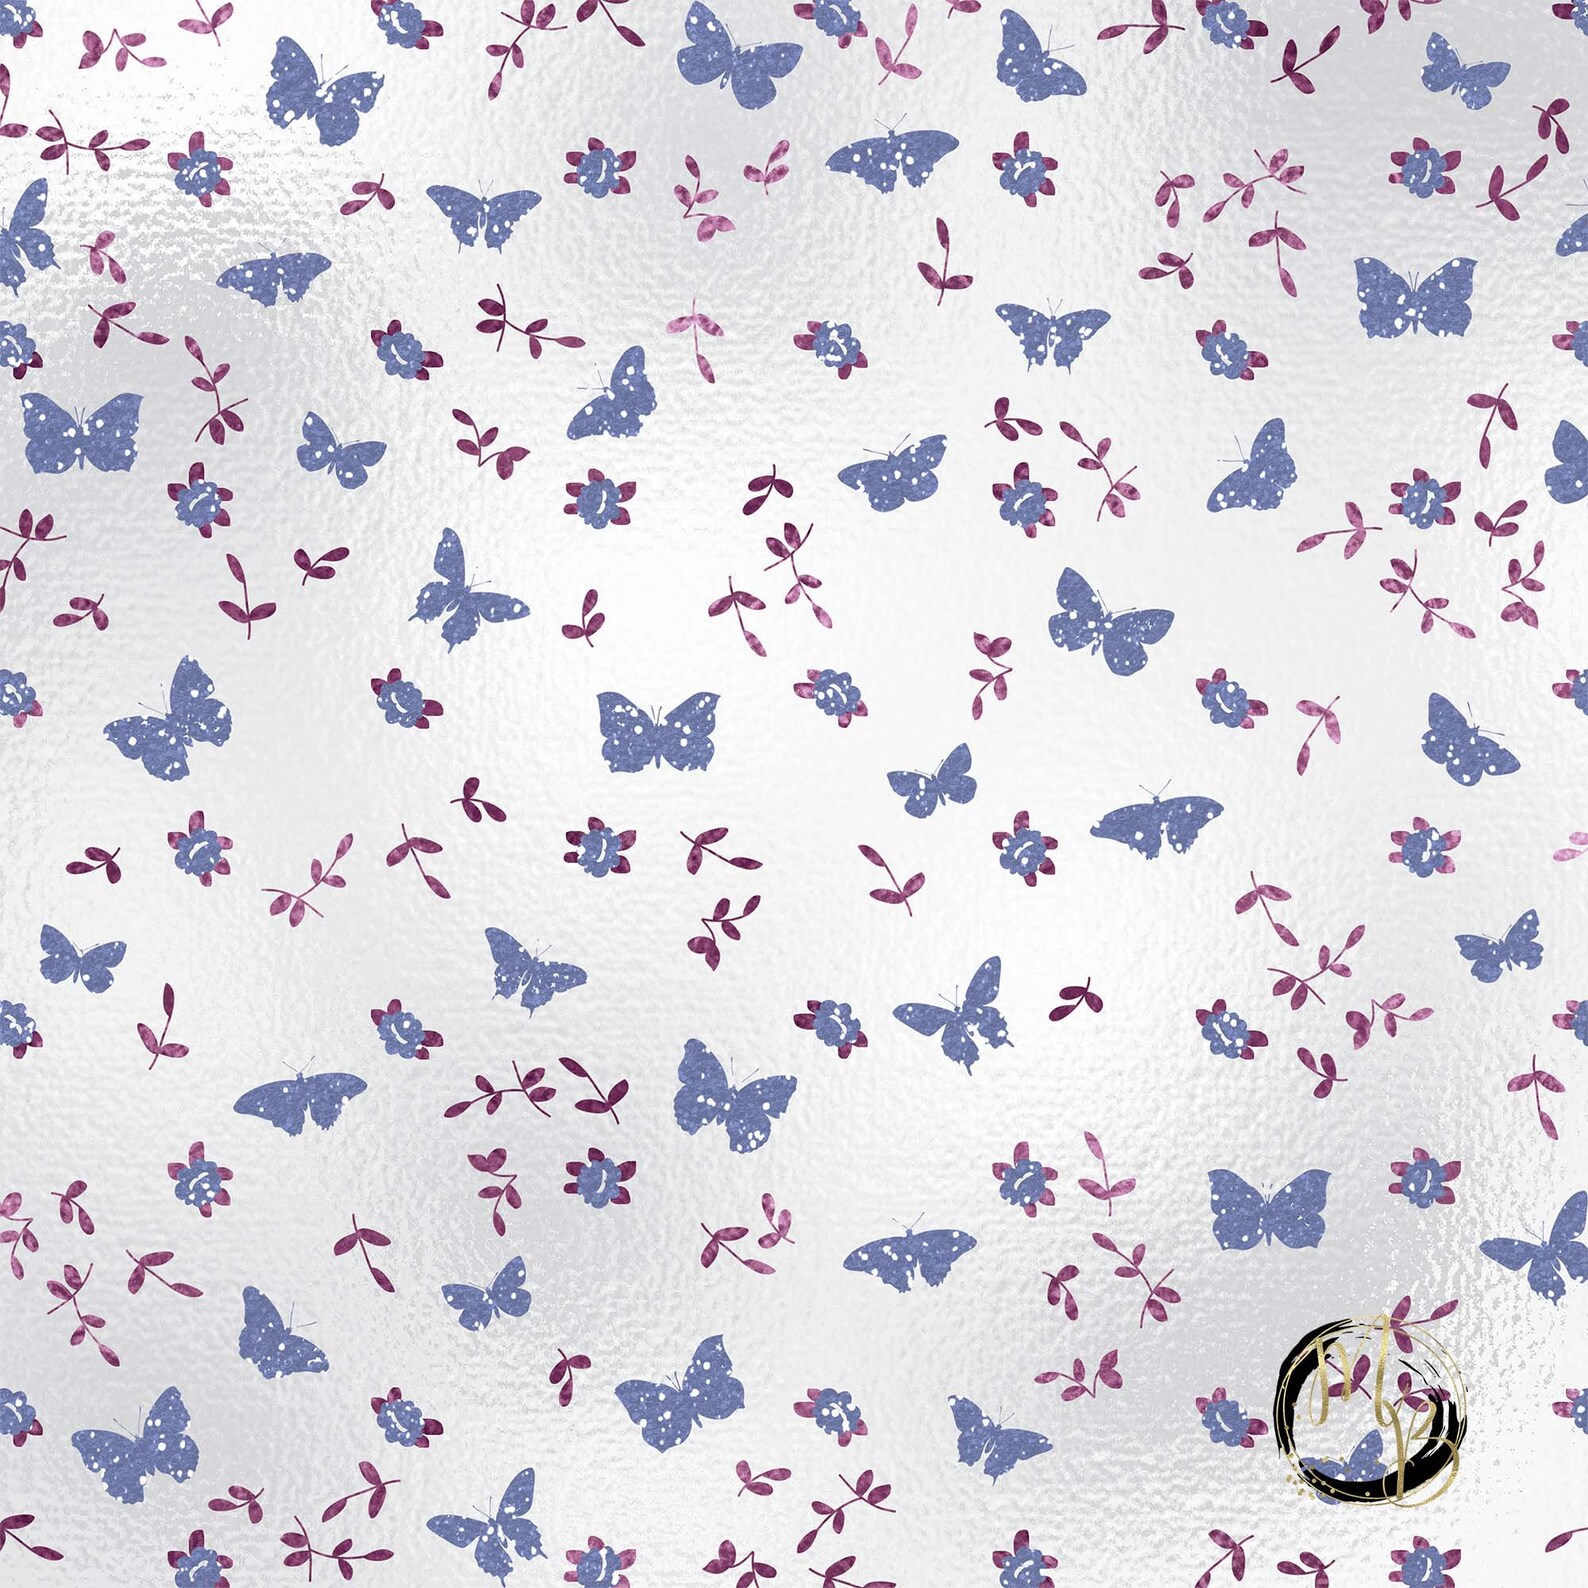 Periwinkle & Plum Butterflies Digital Paper Download with | Etsy